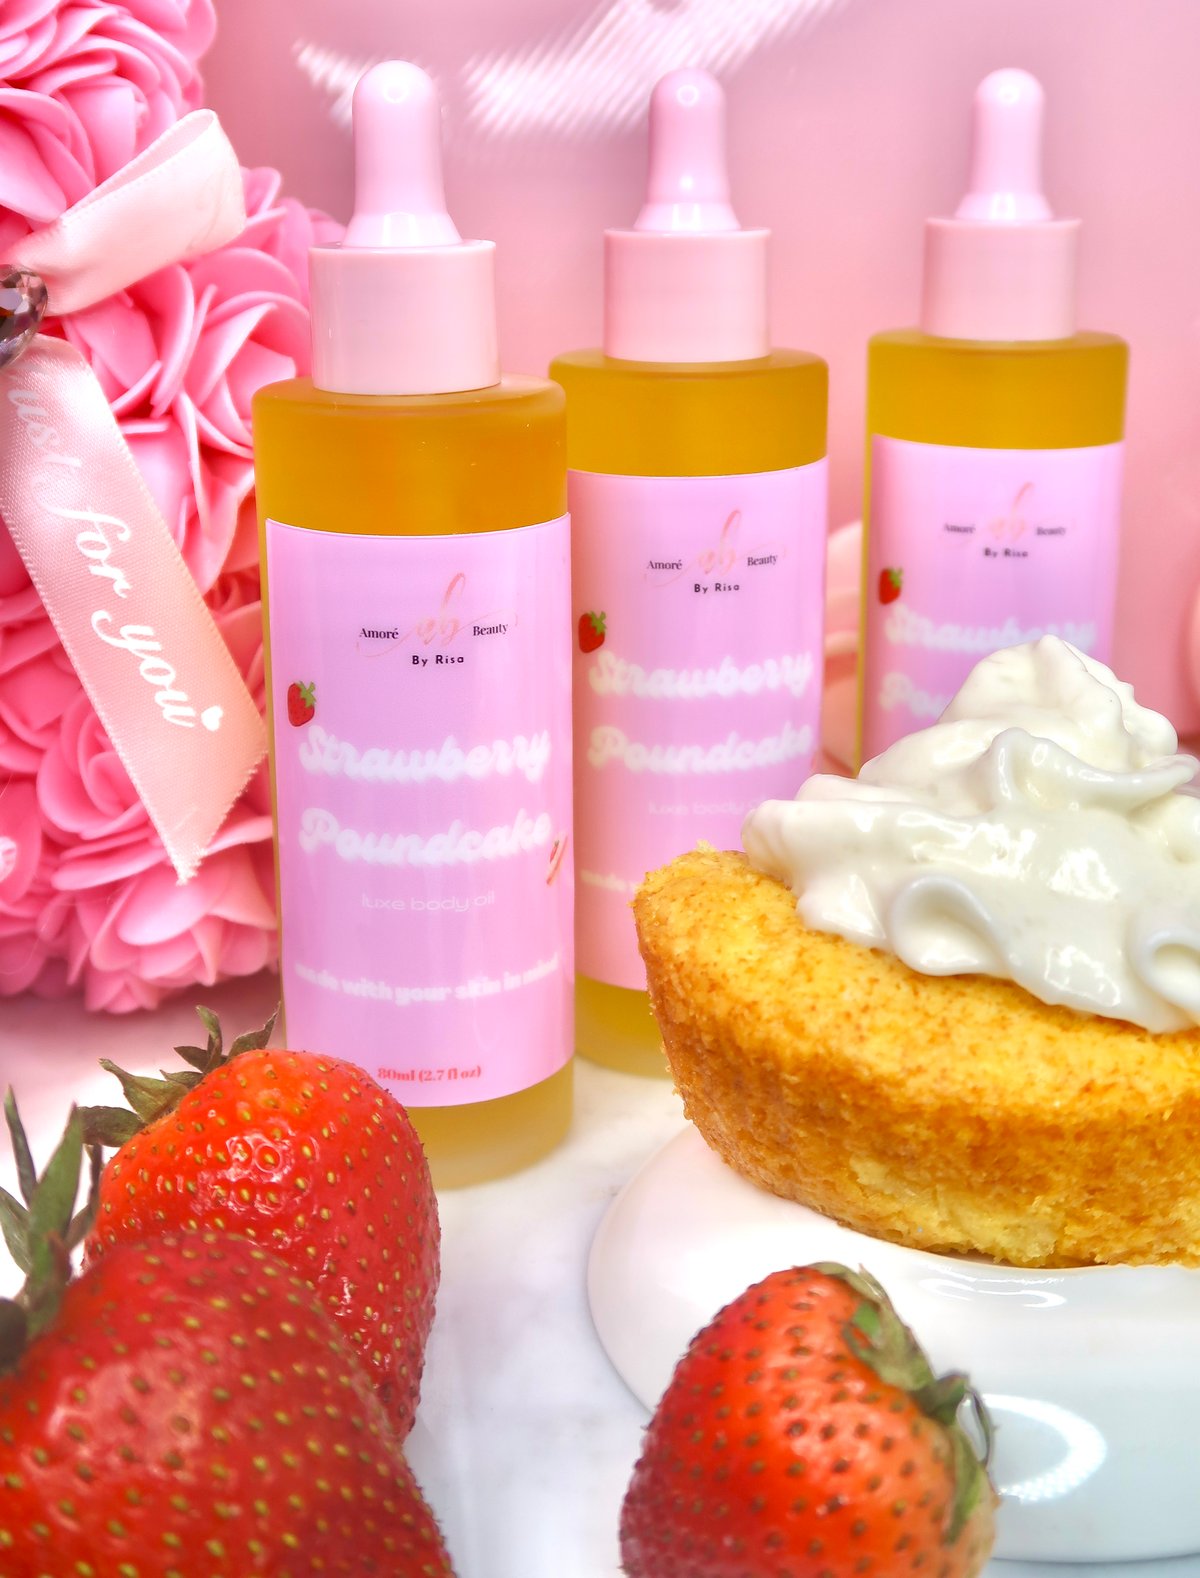 WILDPLUS BODY JUICE Oil Strawberry Shortcake,-Handcrafted Body Oil for  Women $9.99 - PicClick